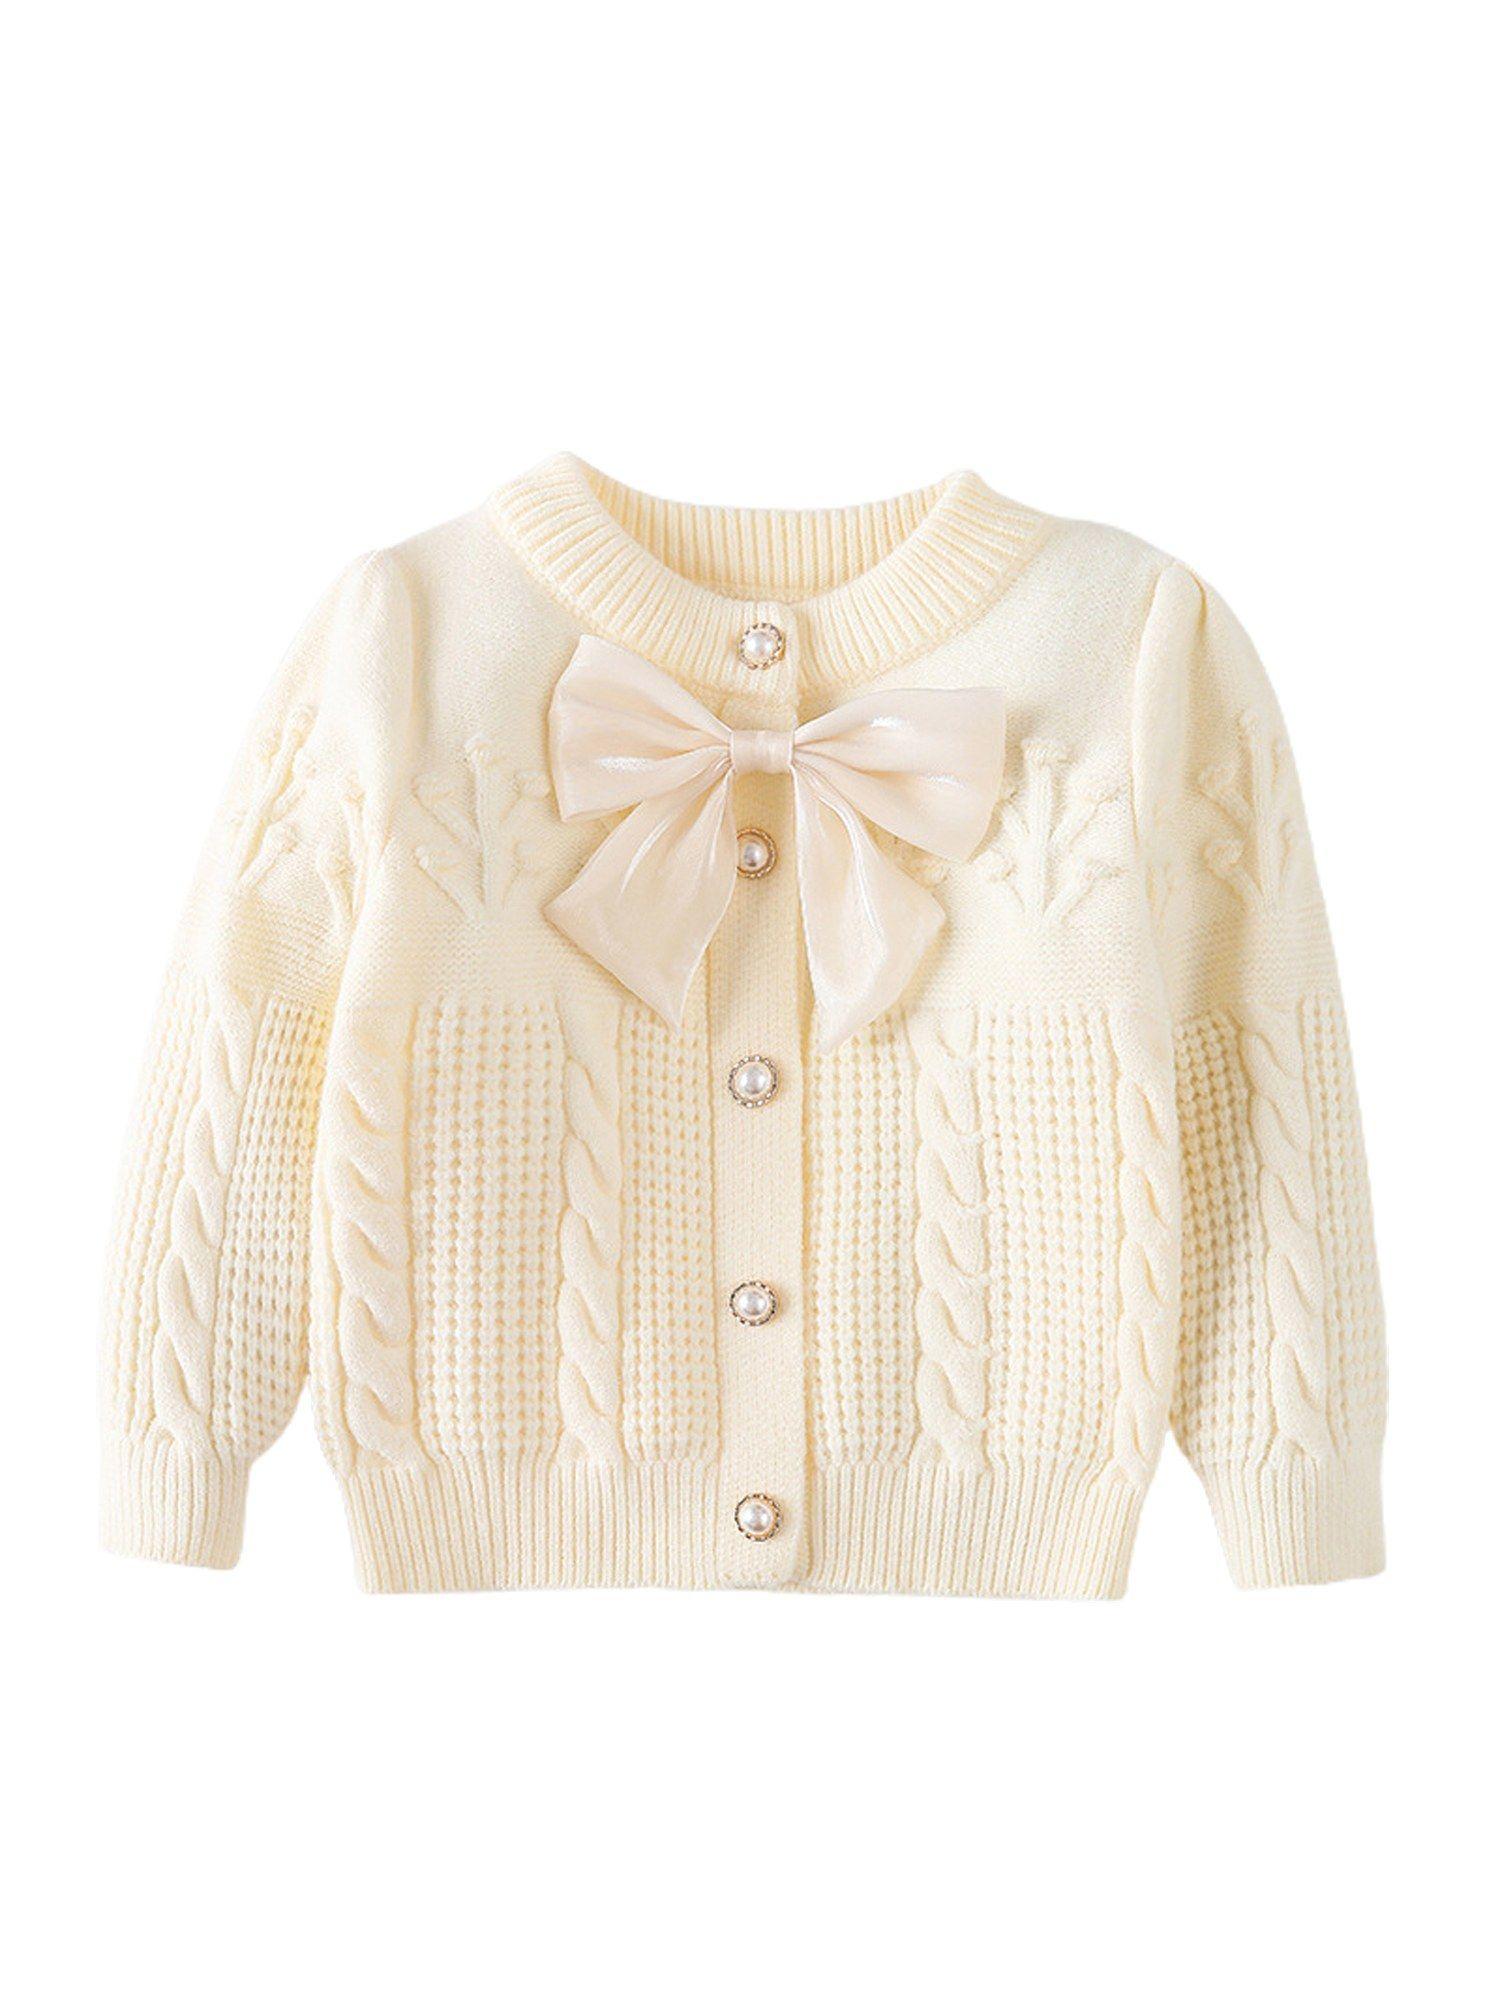 kids cream knitted cardigan sweater with bow